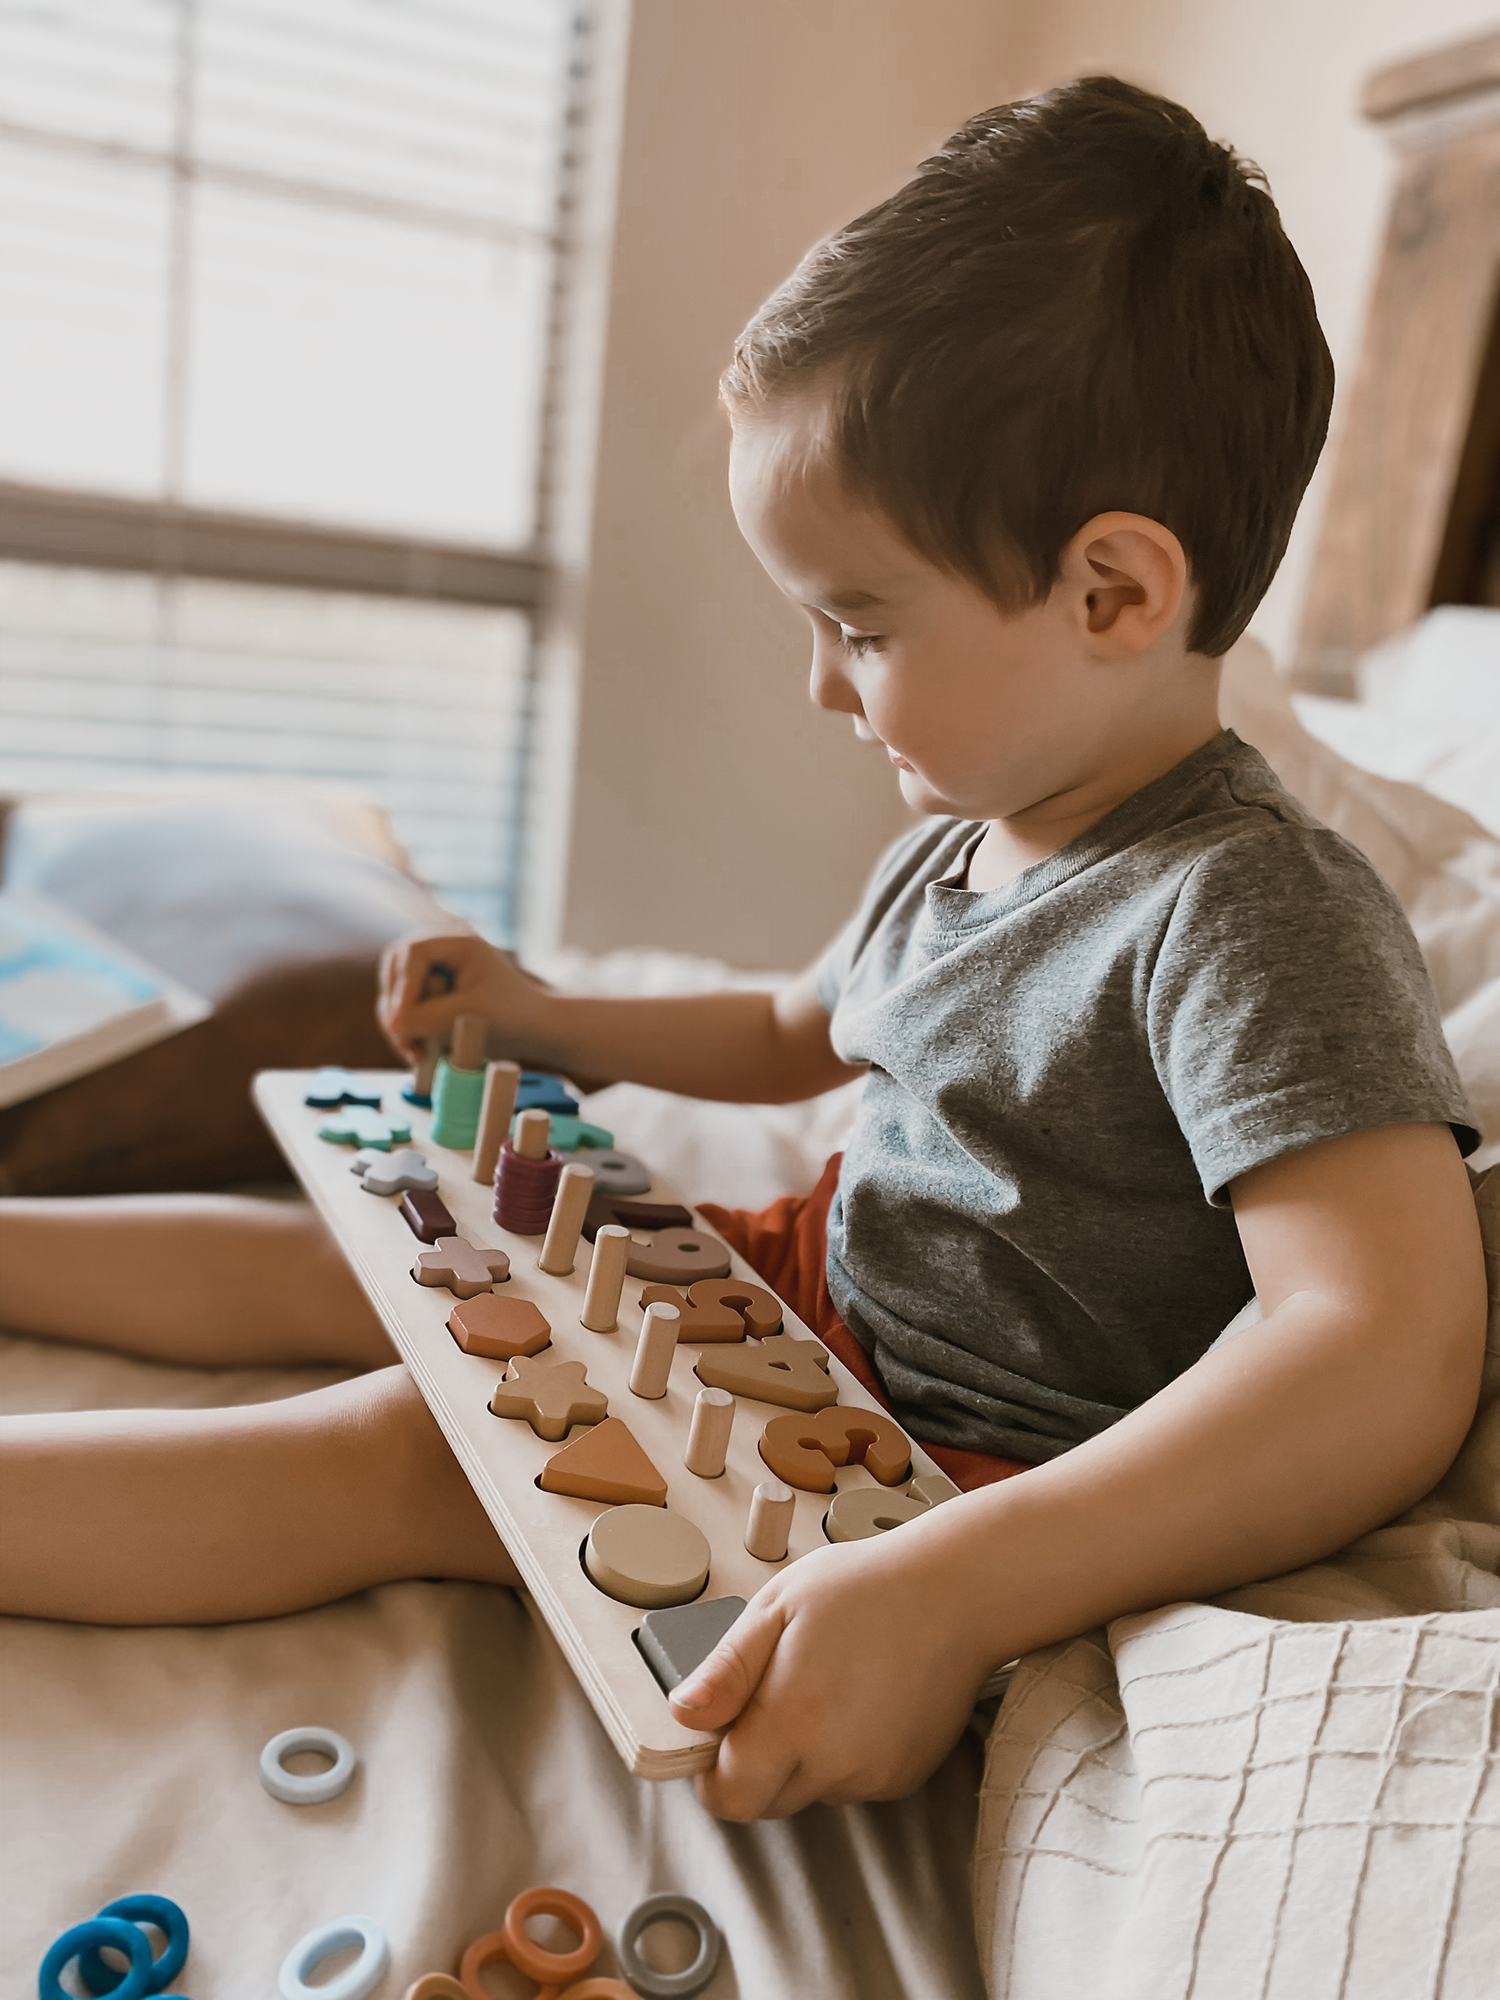 Our family's favorite educational games and toys for learning at home. Catch it all over on KaraLayne.com!